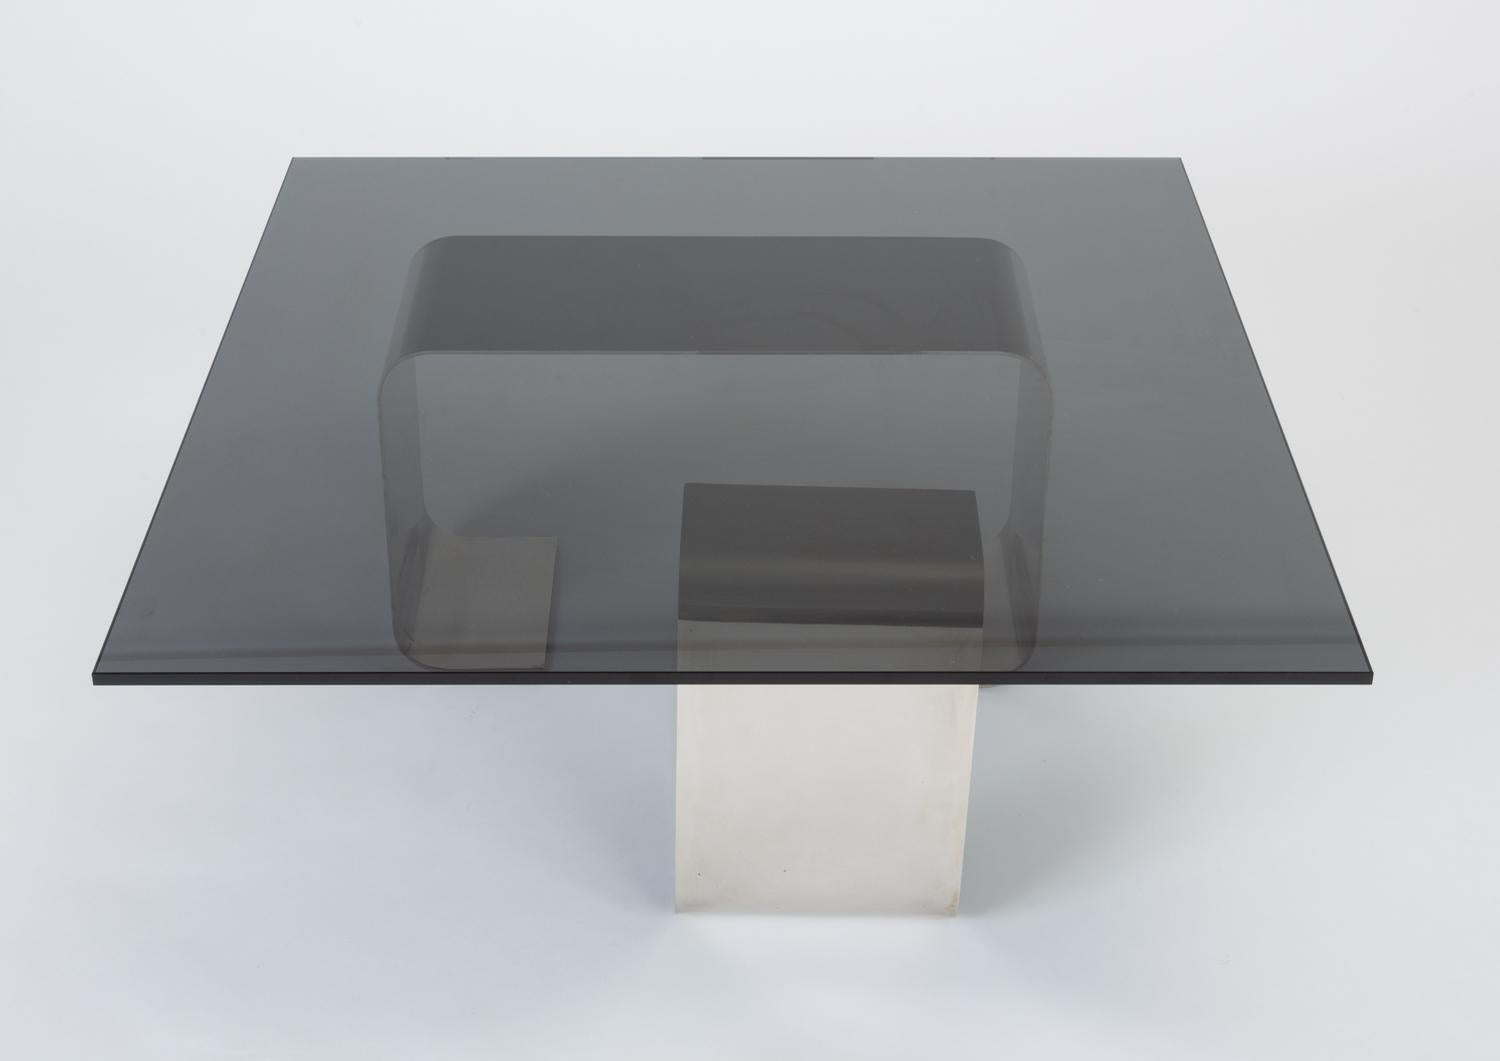 Polished Steel and Smoked Glass Coffee Table by François Monnet for Kappa 3